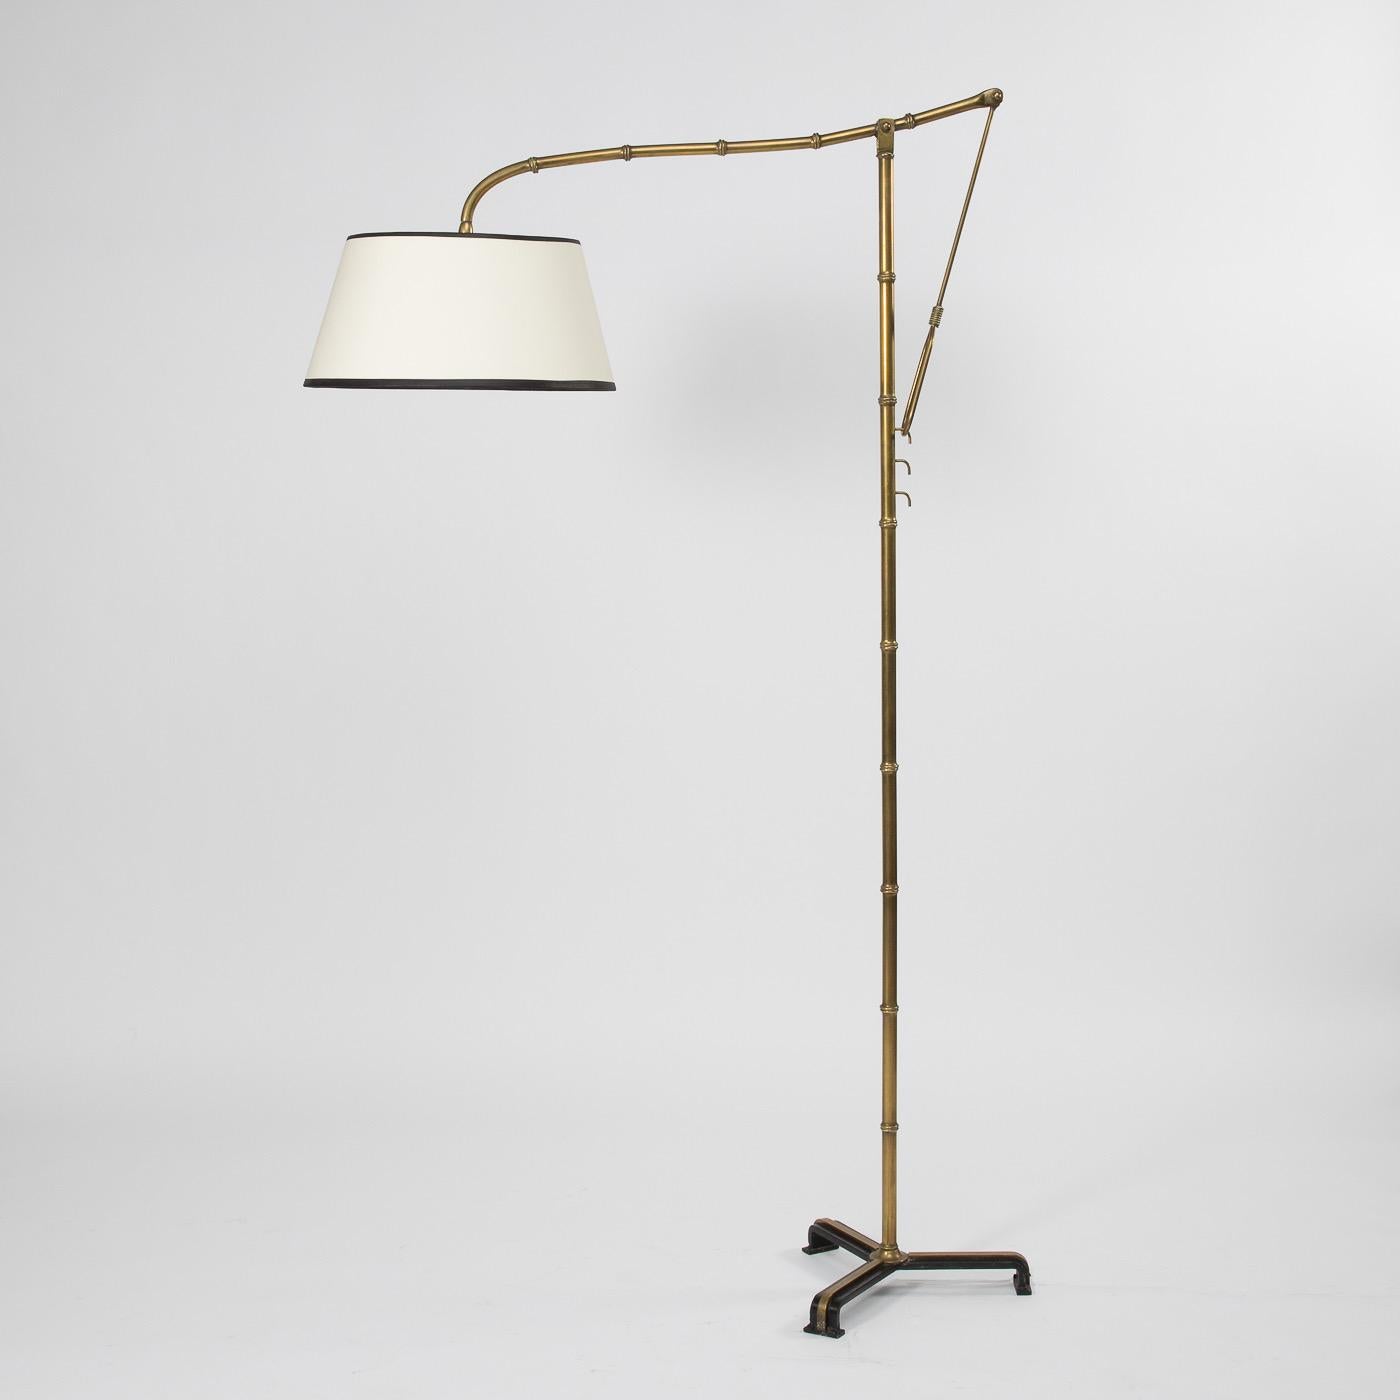 Luminaire à crémaillère consisting of a bronze shaft imitating bamboo resting on a tripod base in wrought and blackened iron.
The upper part of the Luminaire can be “hung” on three different hooks to allow different positioning and